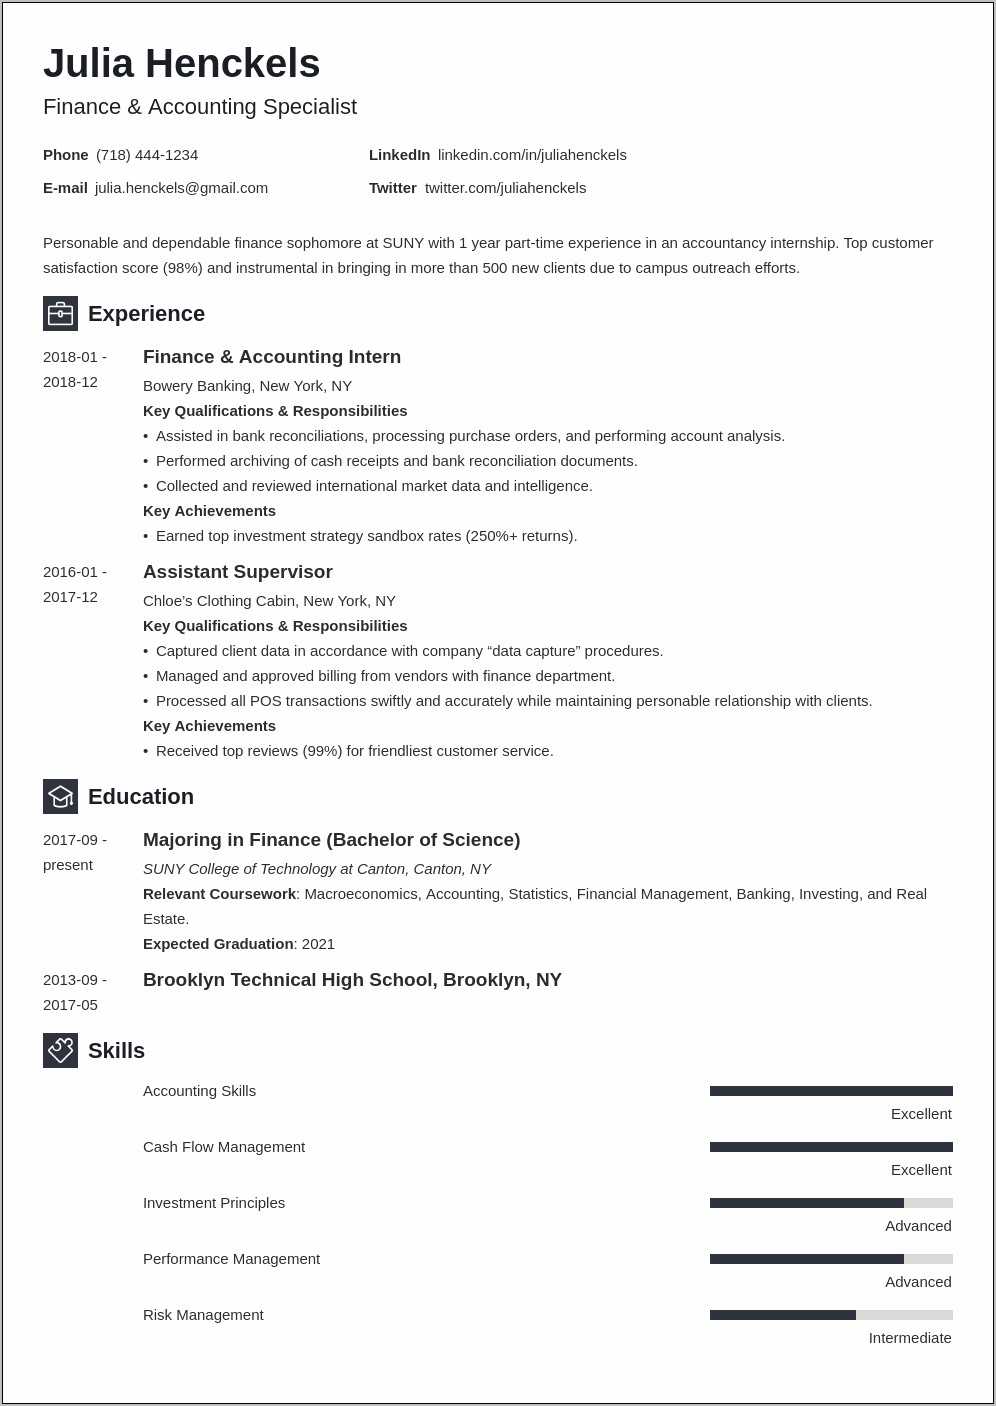 Resume Career Objective Examples For Students